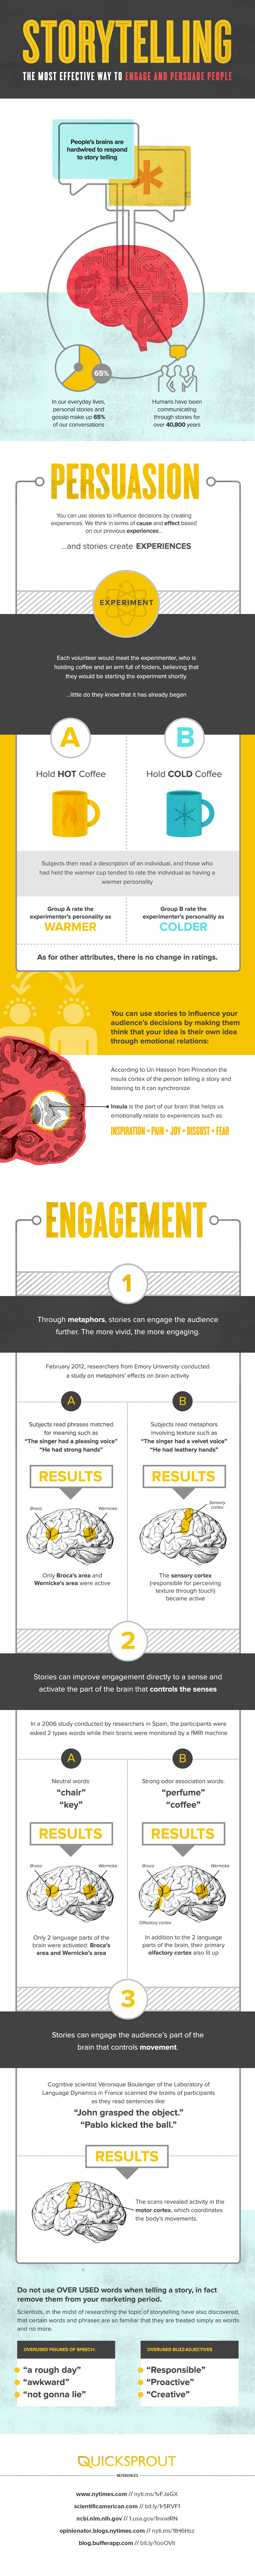 How to Engage and Persuade People Through Storytelling